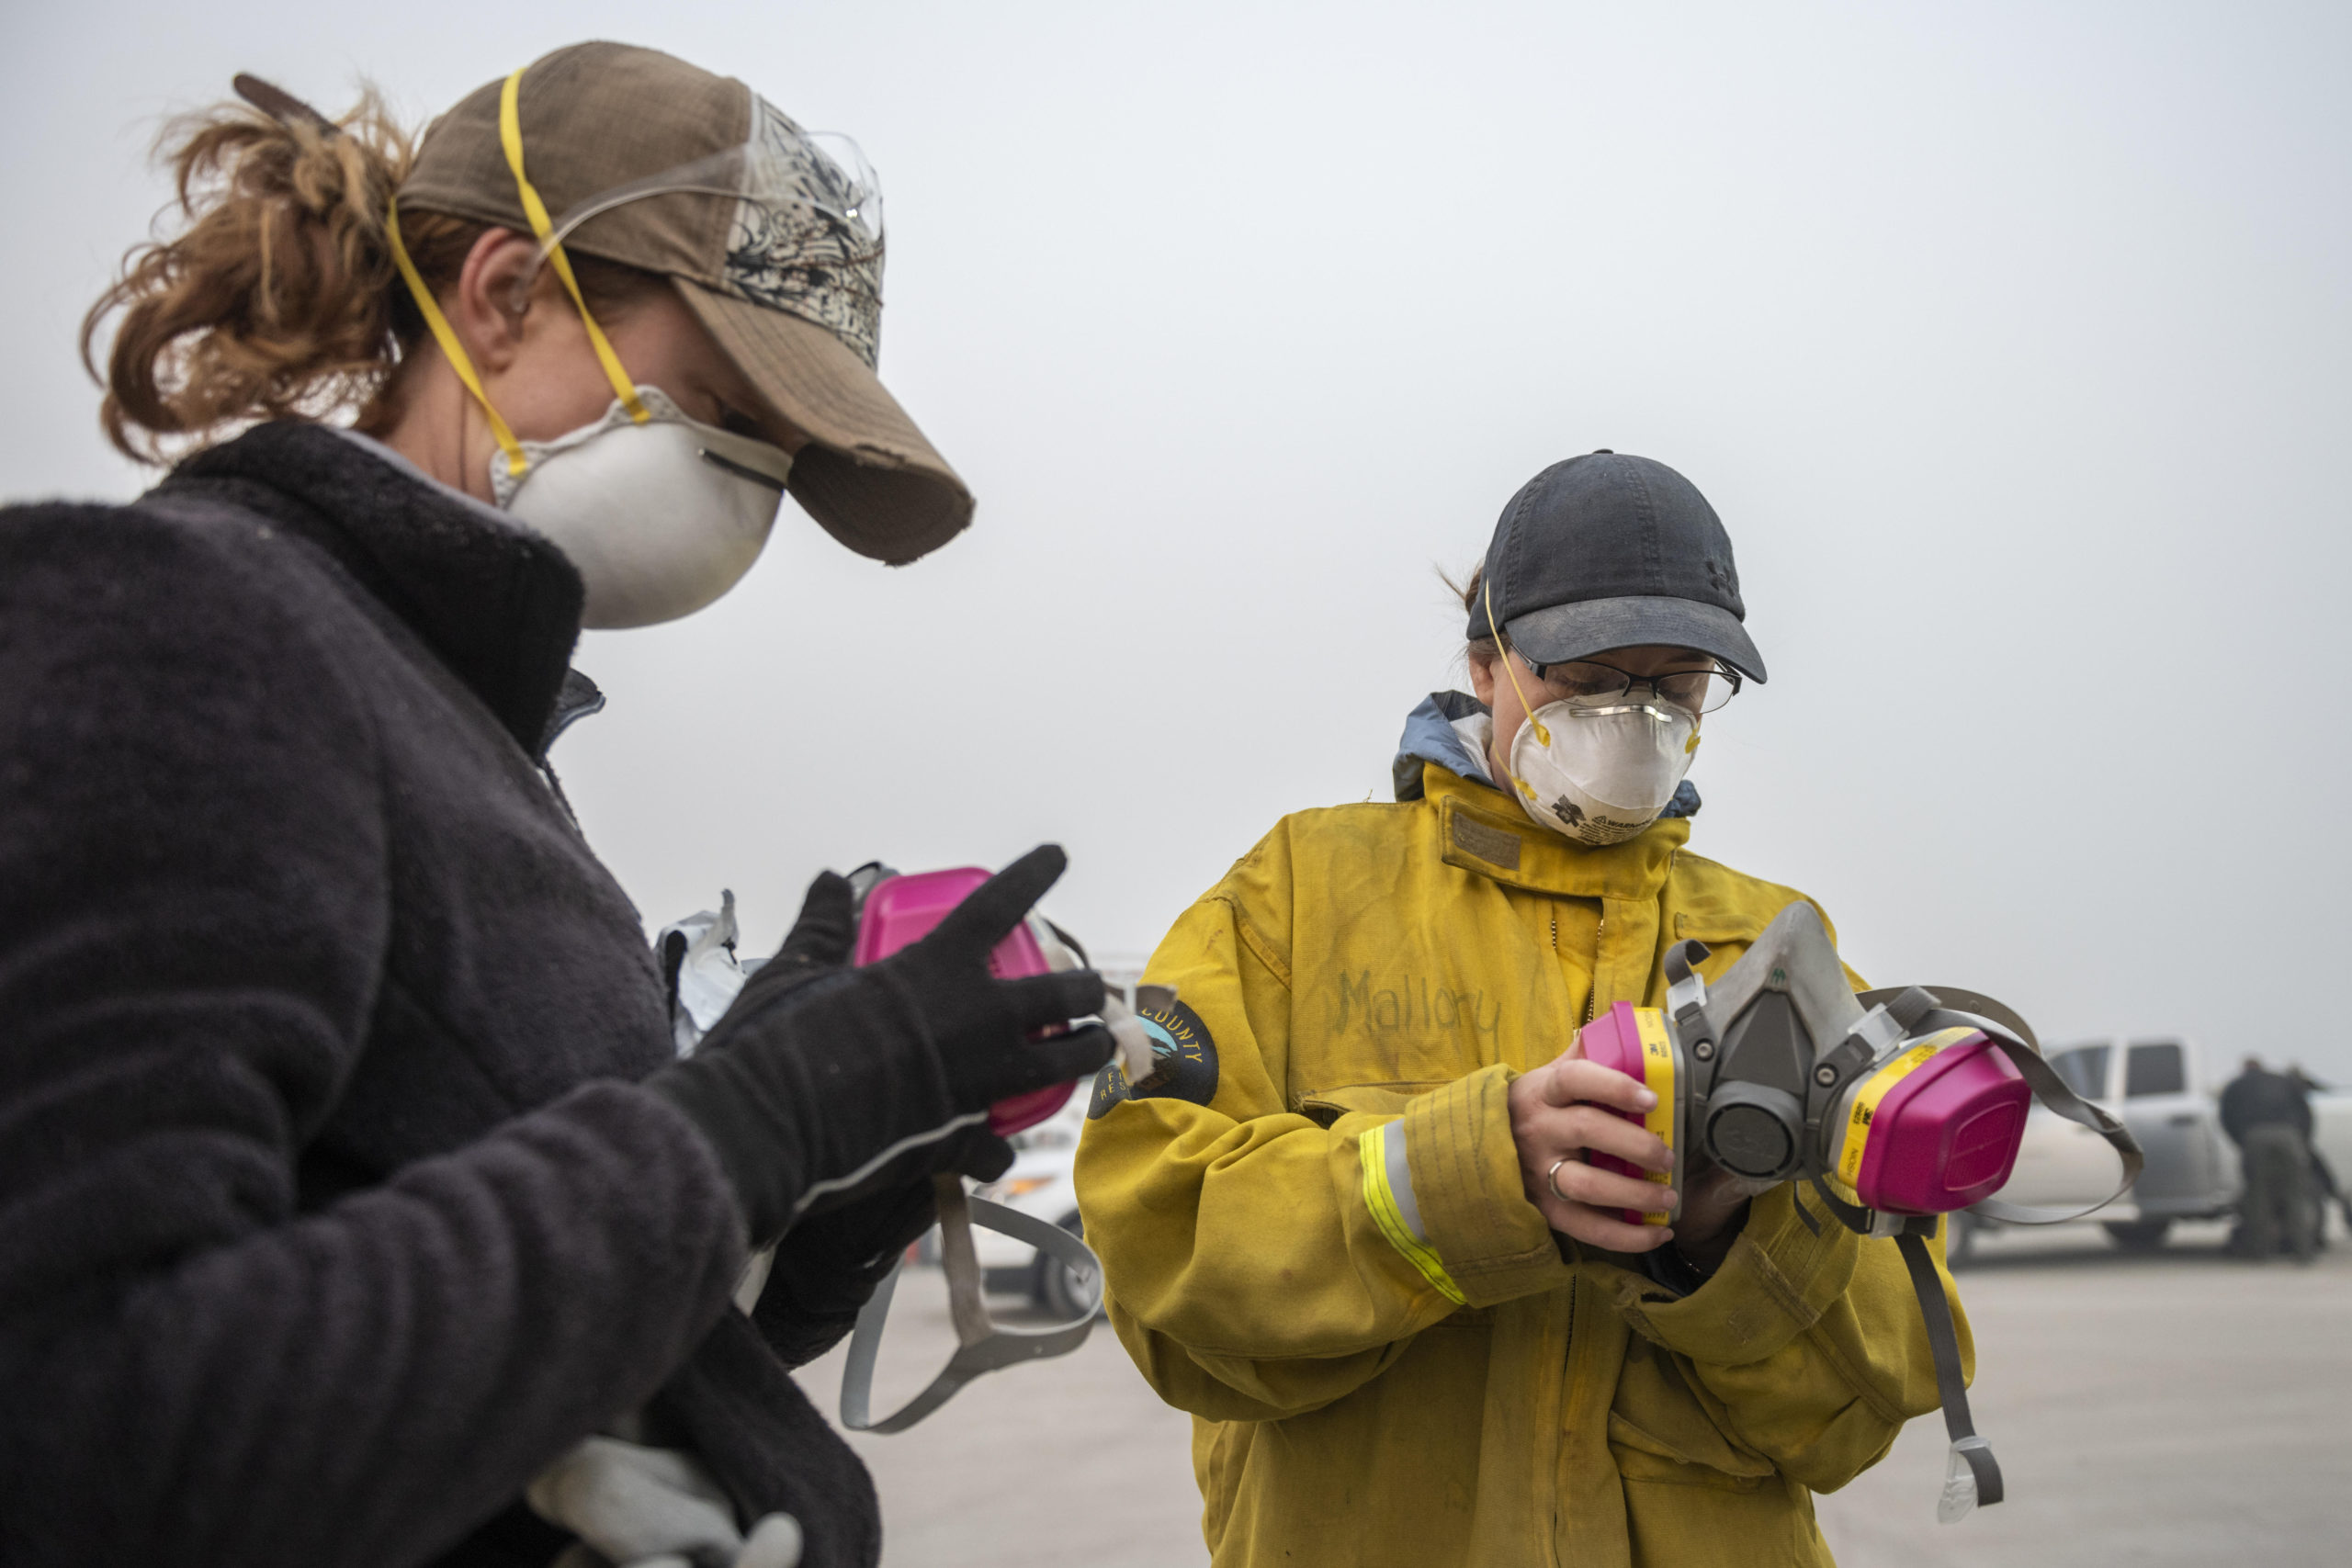 Ashley Kendell (left) Mallory Peters (right) put on air masks as a team of Anthropologists work with the Butte County Sheriff Coroners at the Coroner Incident Command at Butte College to identify human remains consumed by the Camp Fire continues to impact campus carrying heavy smoke over the area on Friday, November 16, 2018 in Oroville, Calif. (Jason Halley/University Photographer/CSU Chico)